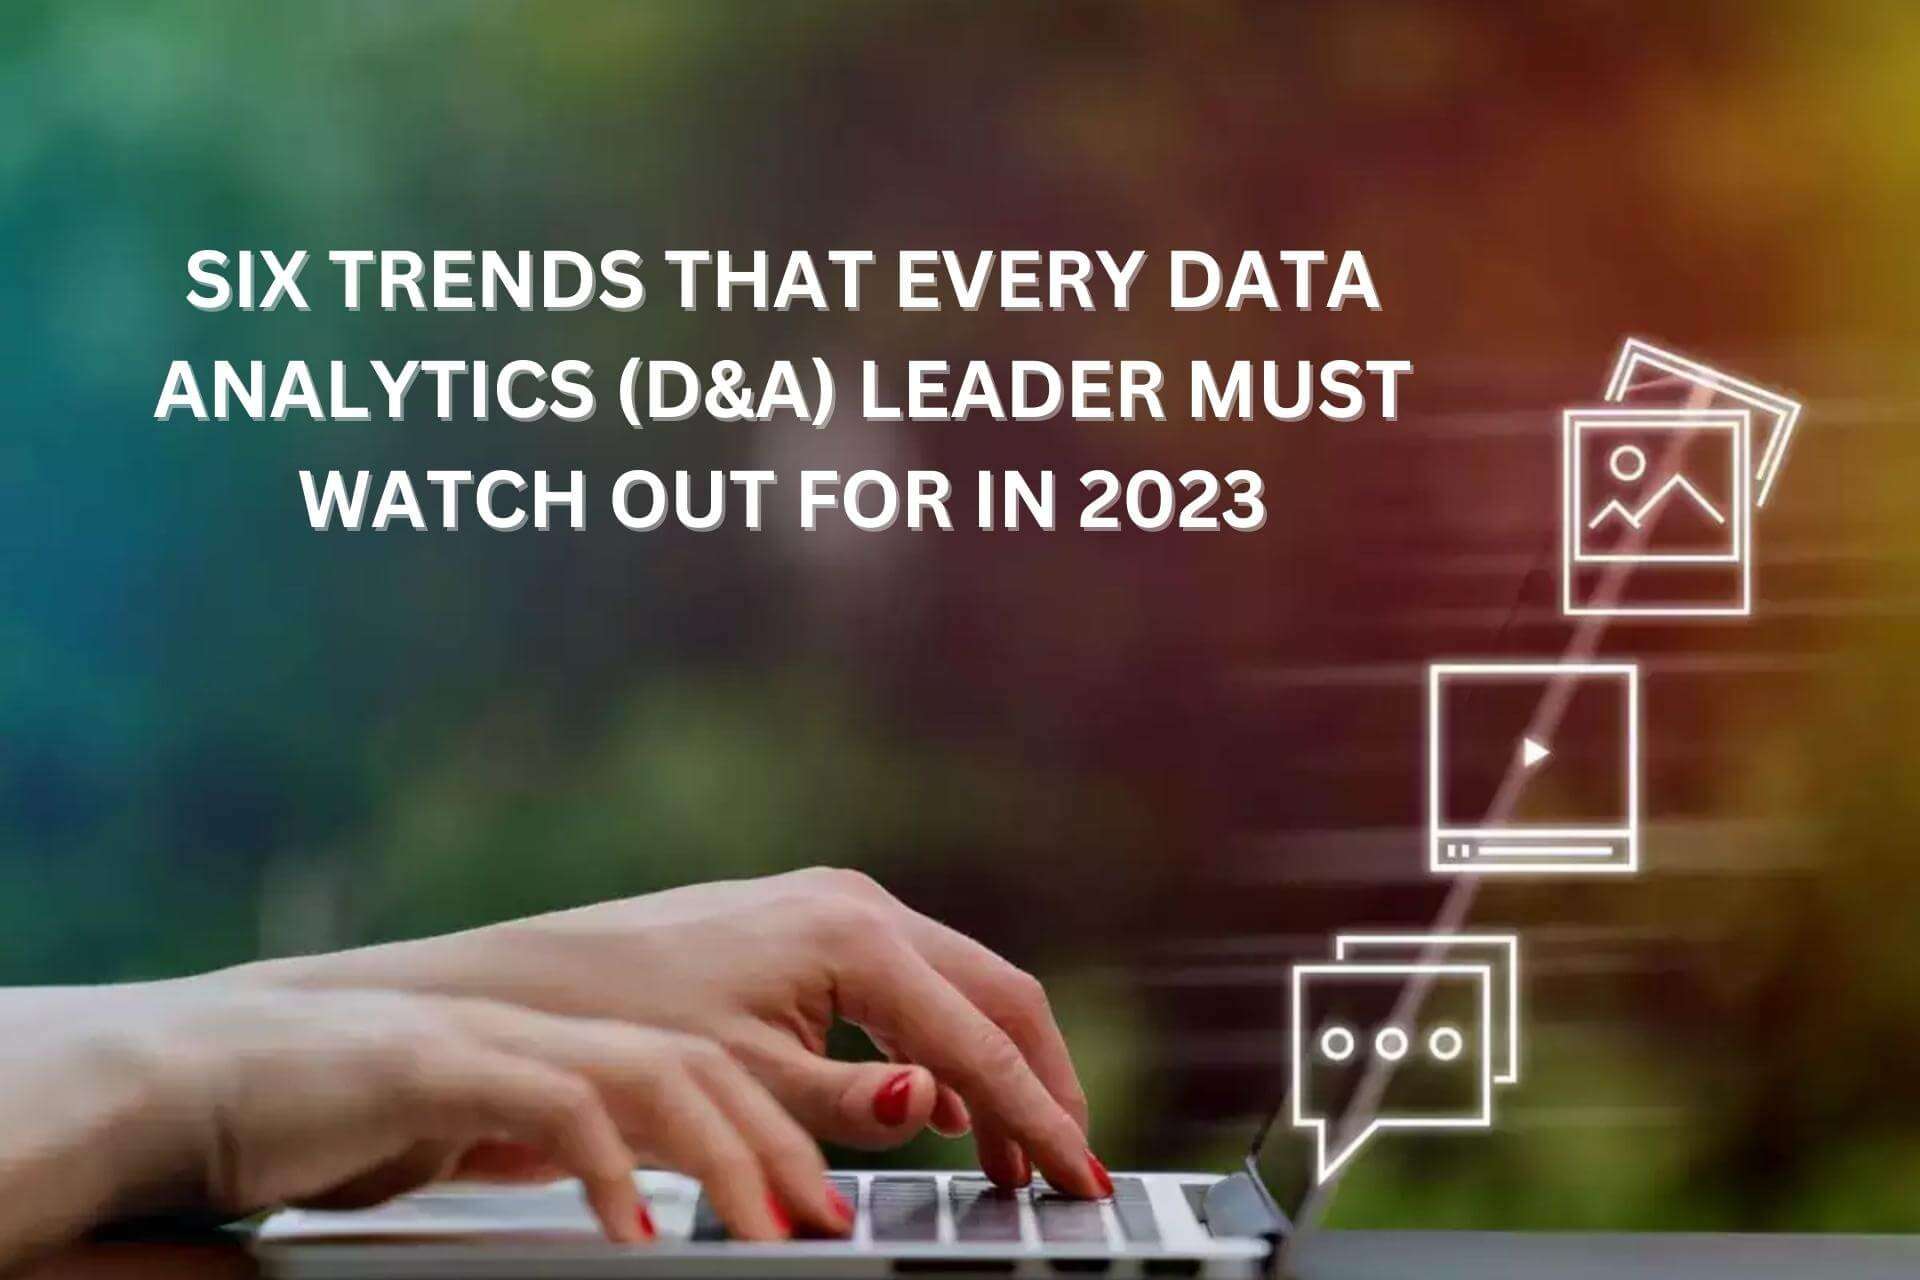 Six Trends That Every Data Analytics Leader Must Watch Out For In 2023